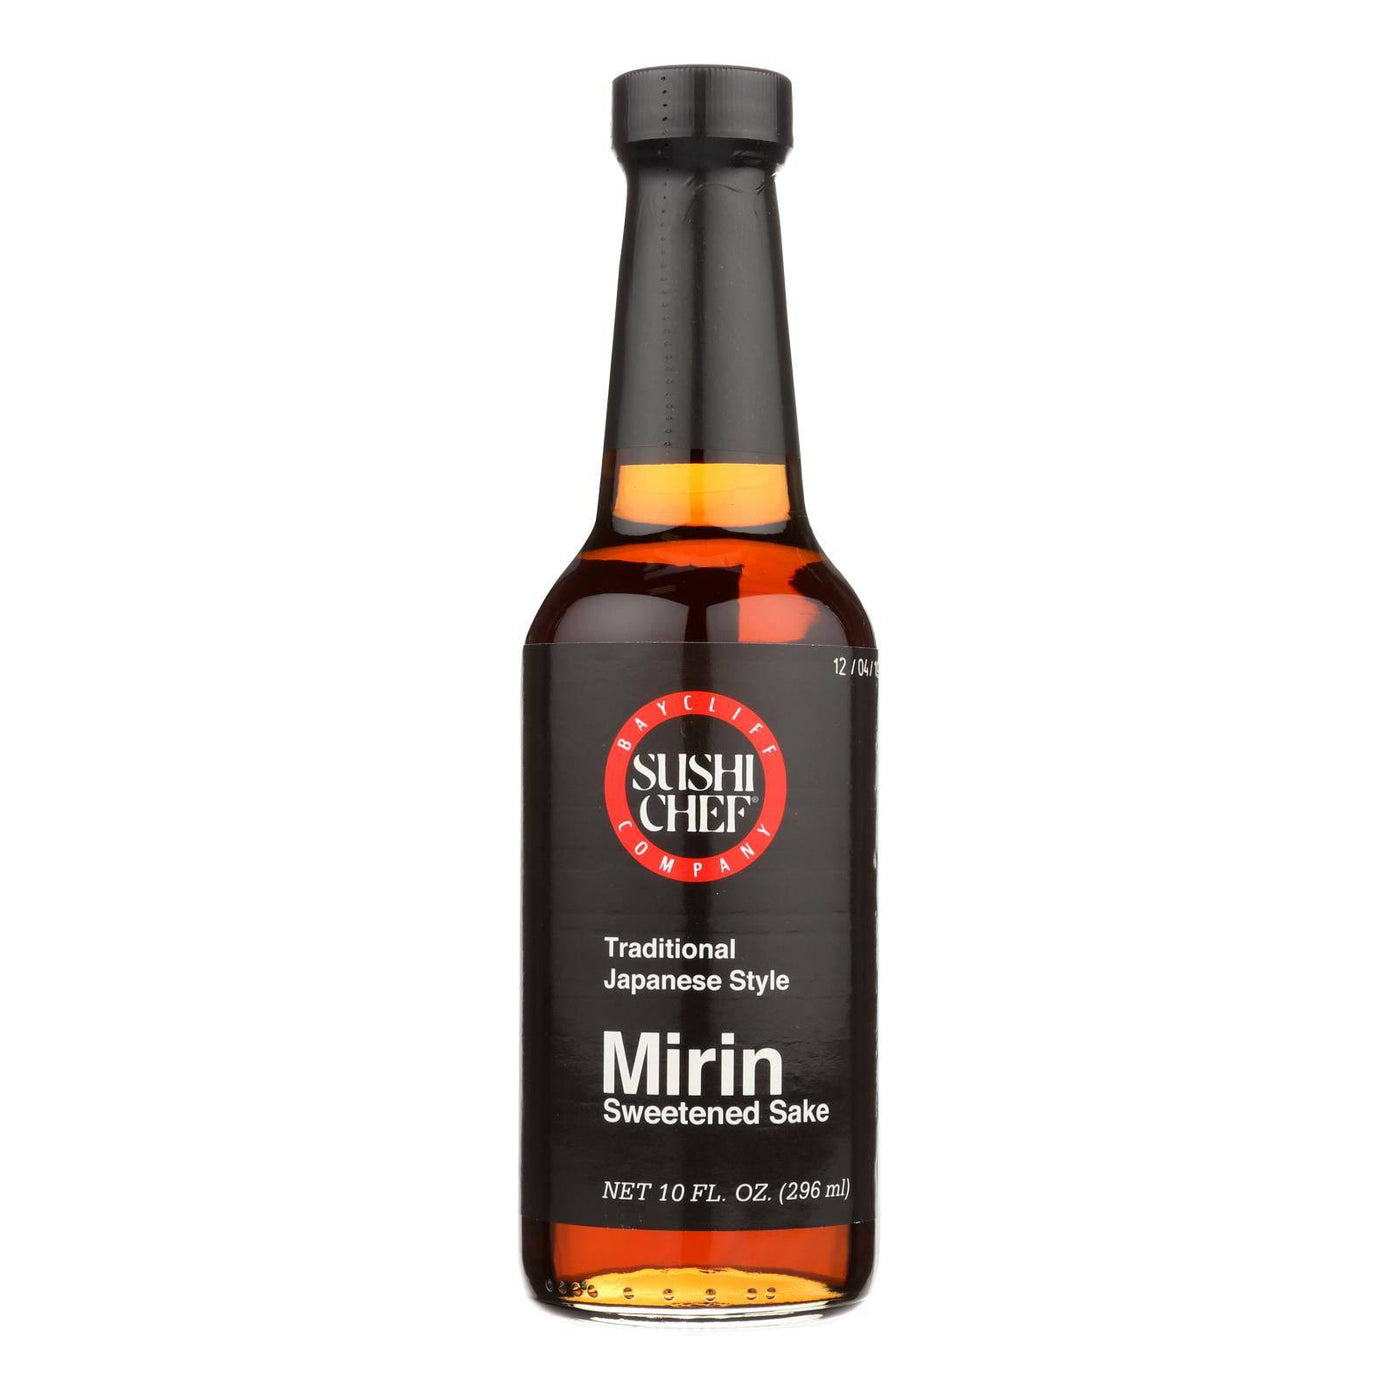 Buy Sushi Chef Traditional Japanese Style Mirin Sweetened Sake - Case Of 6 - 10 Oz.  at OnlyNaturals.us